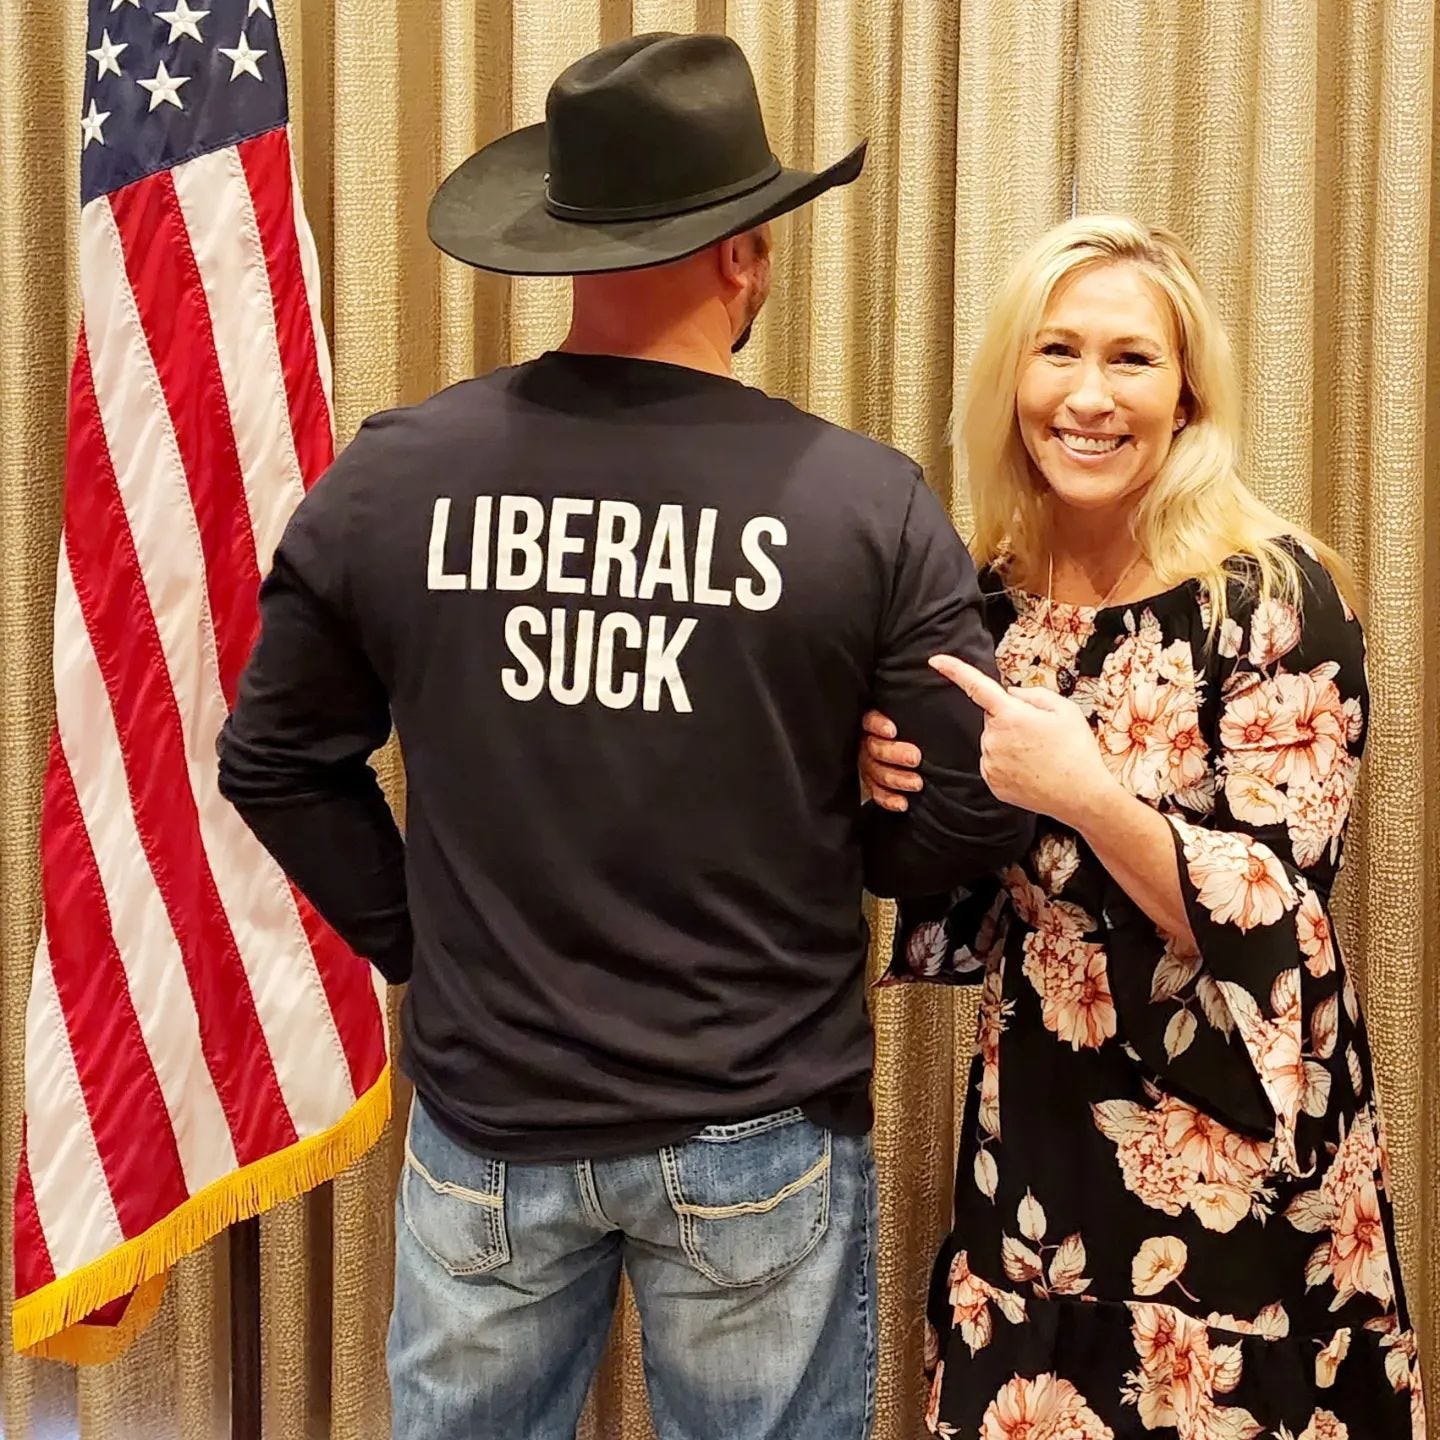 May be an image of 2 people, people standing and text that says 'LIBERALS SUCK បO'